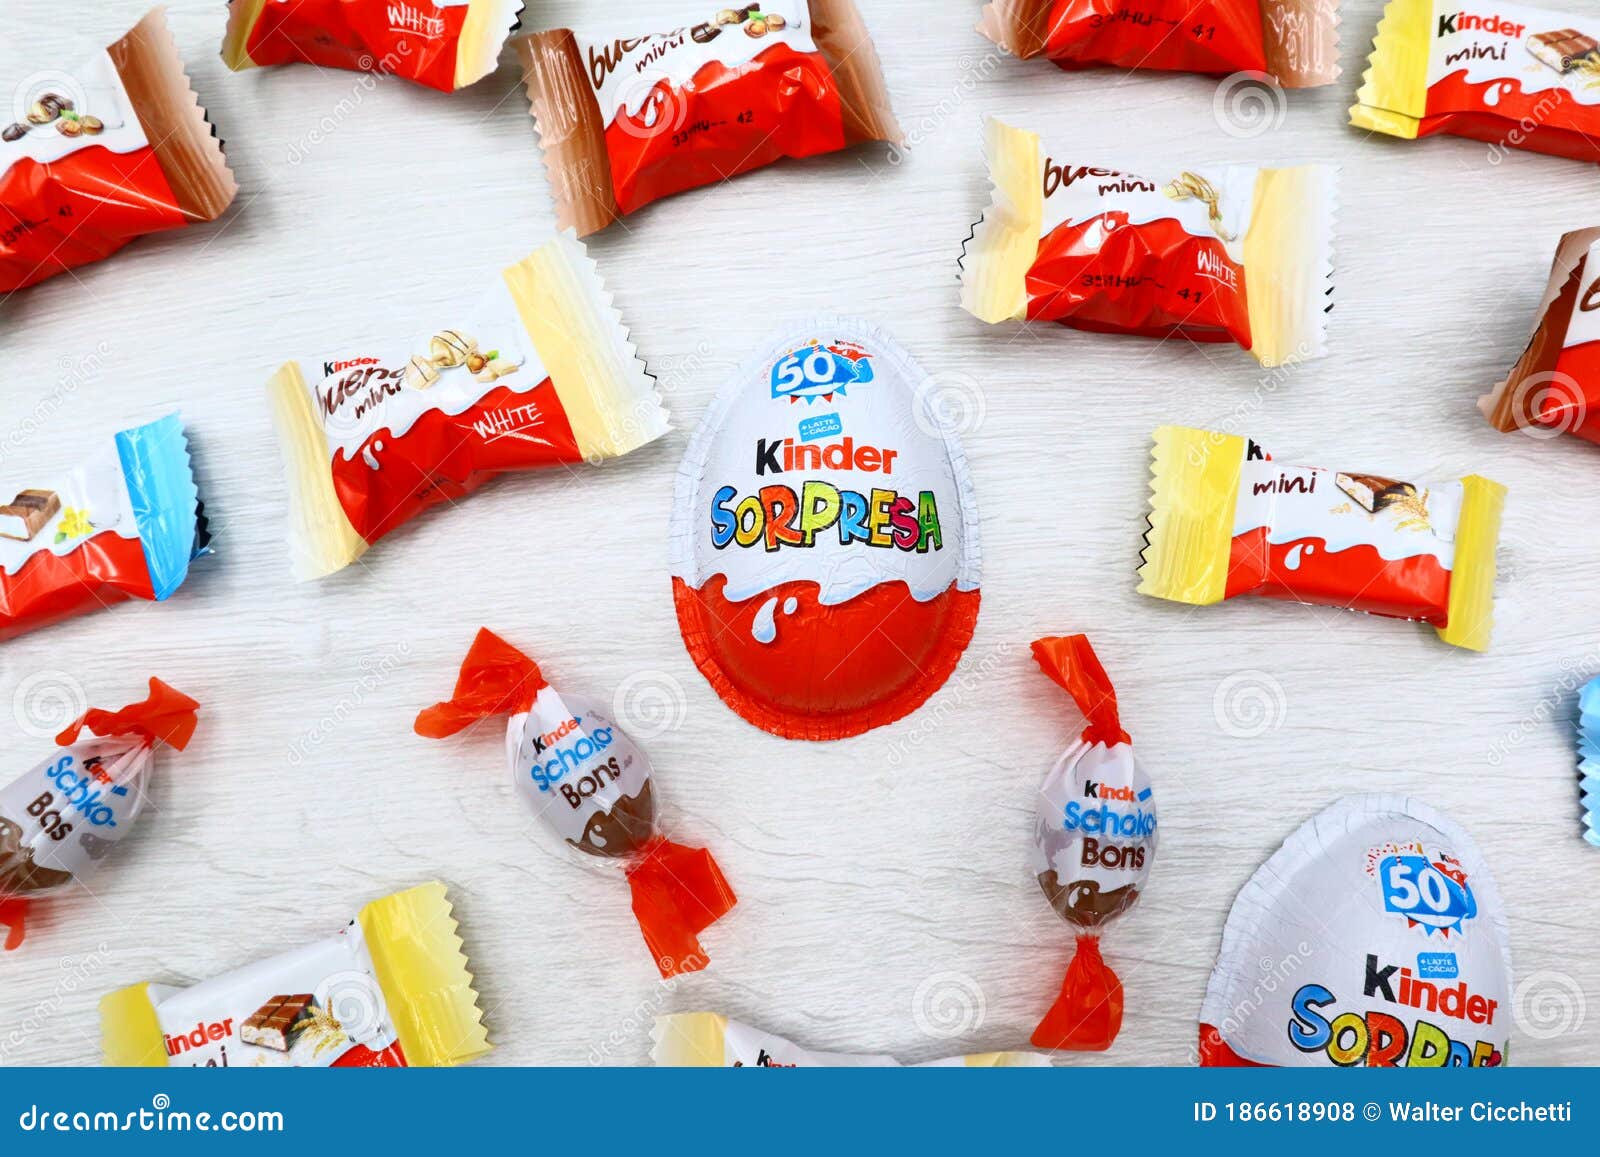 Kinder Surprise and Kinder Mini Chocolates in Italy by Ferrero Editorial Photo - Image of confection, bars: 186618908